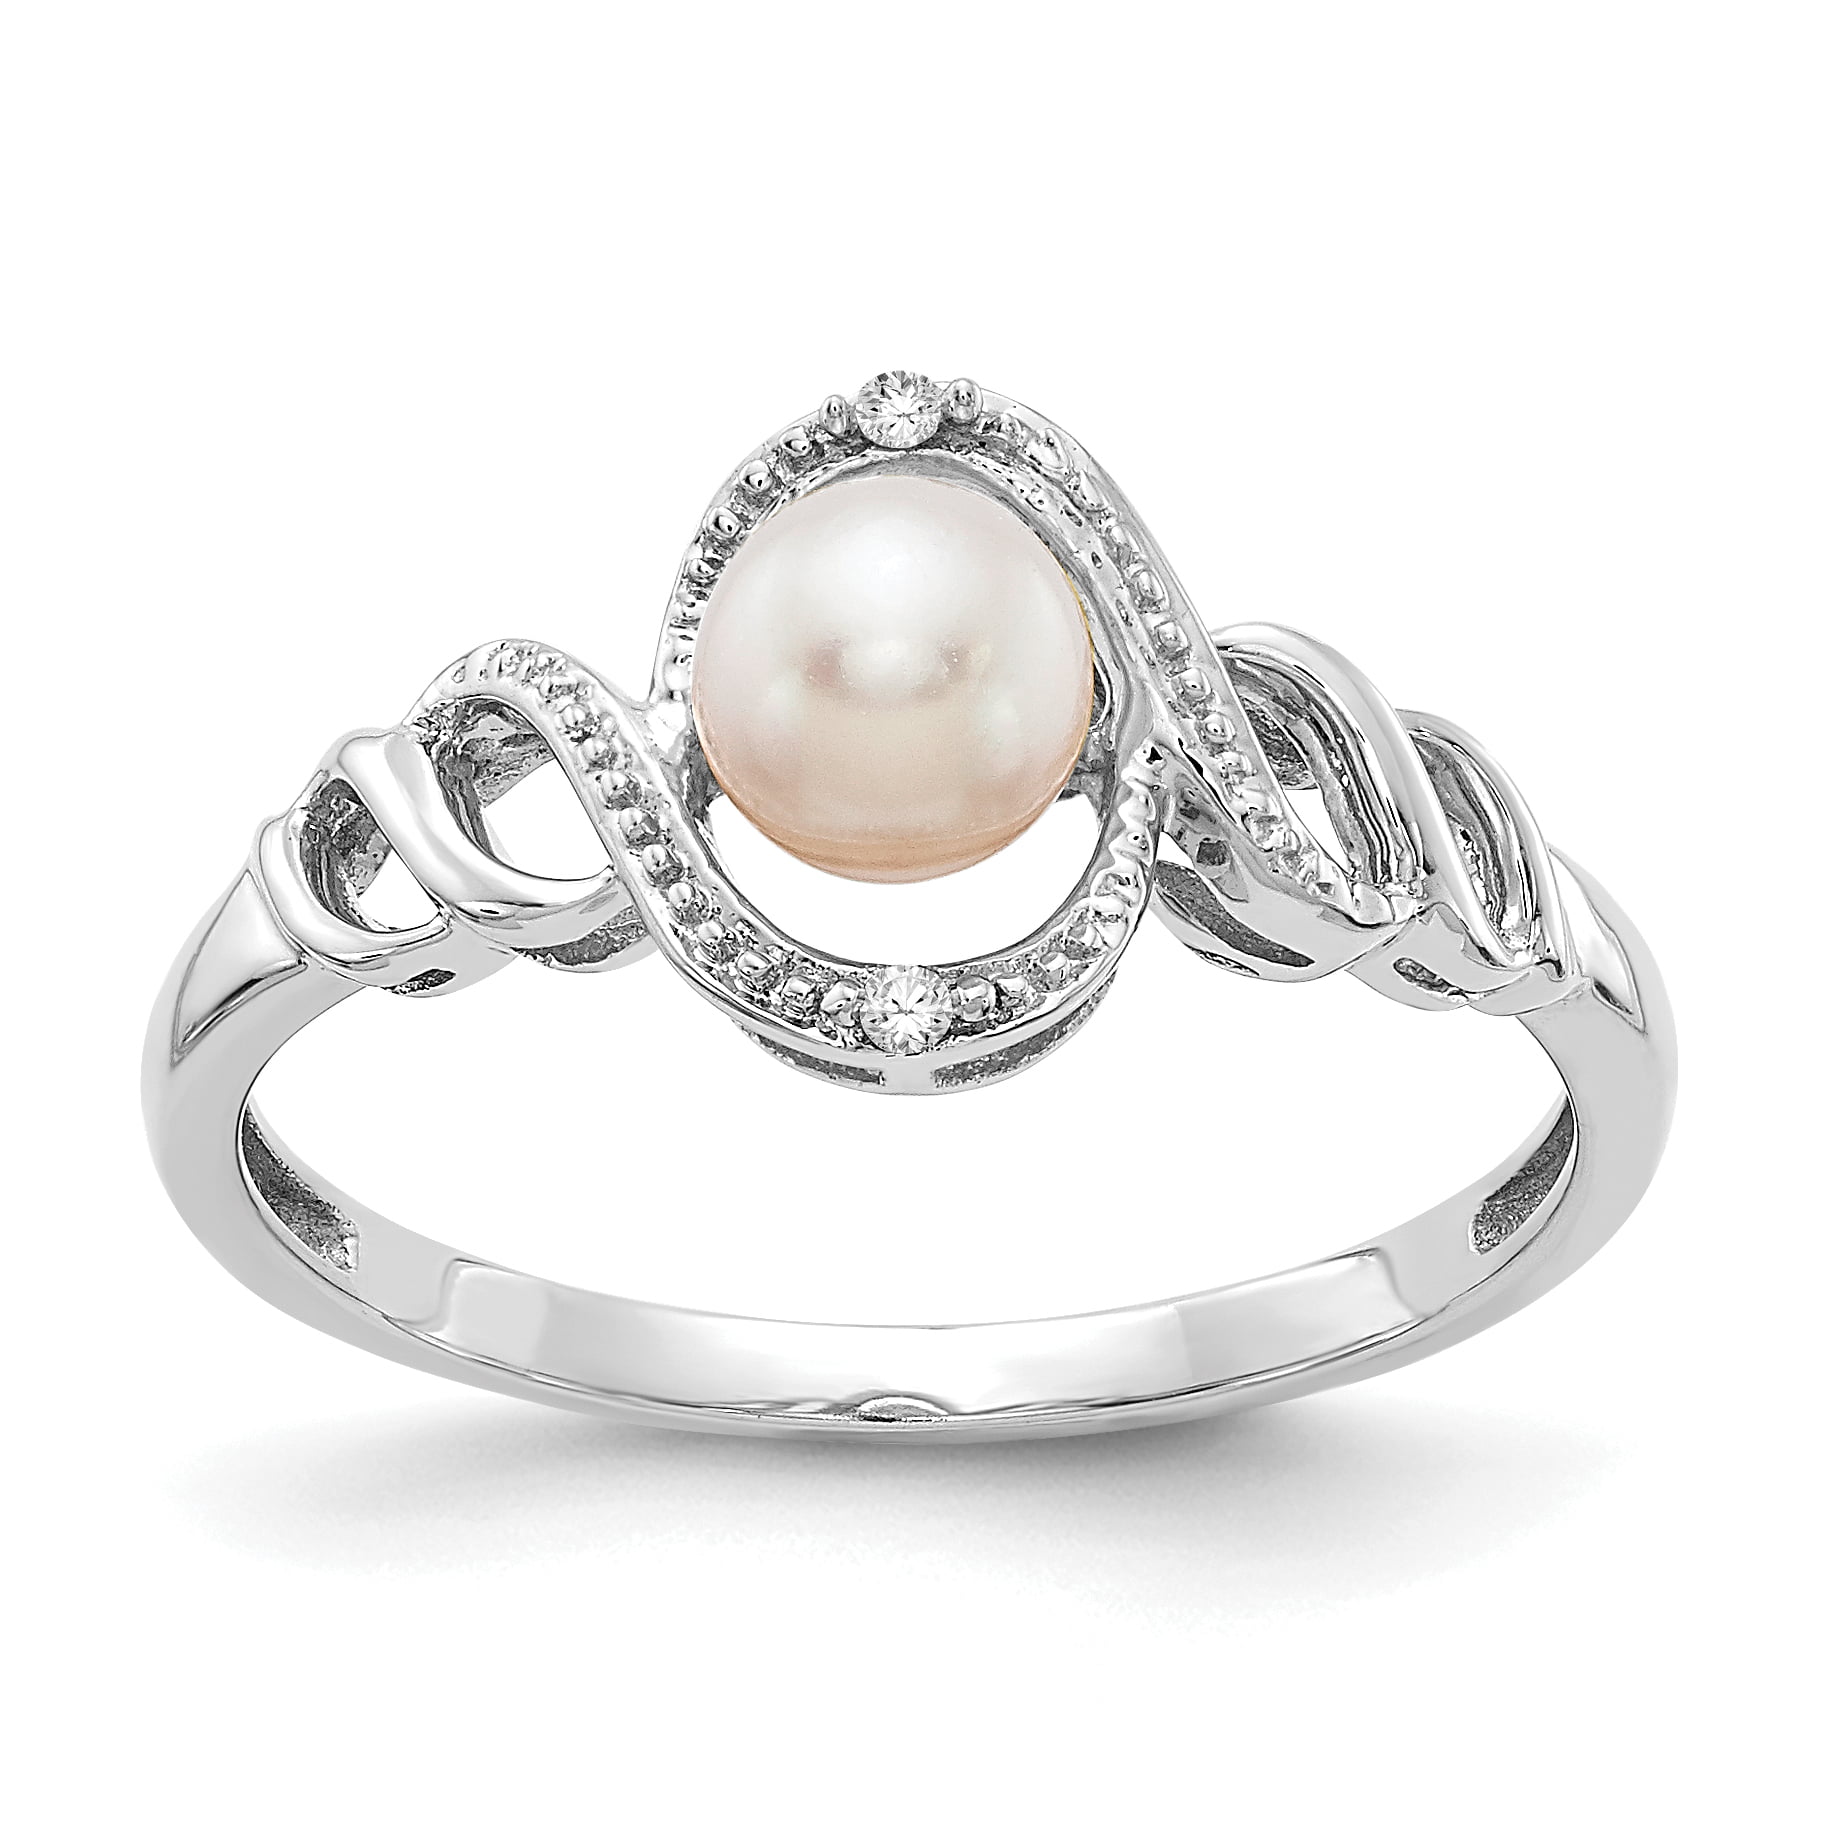 Sizes 4-13 10k Yellow or White Gold 4.5mm Freshwater Cultured Pearl And Diamond Ring